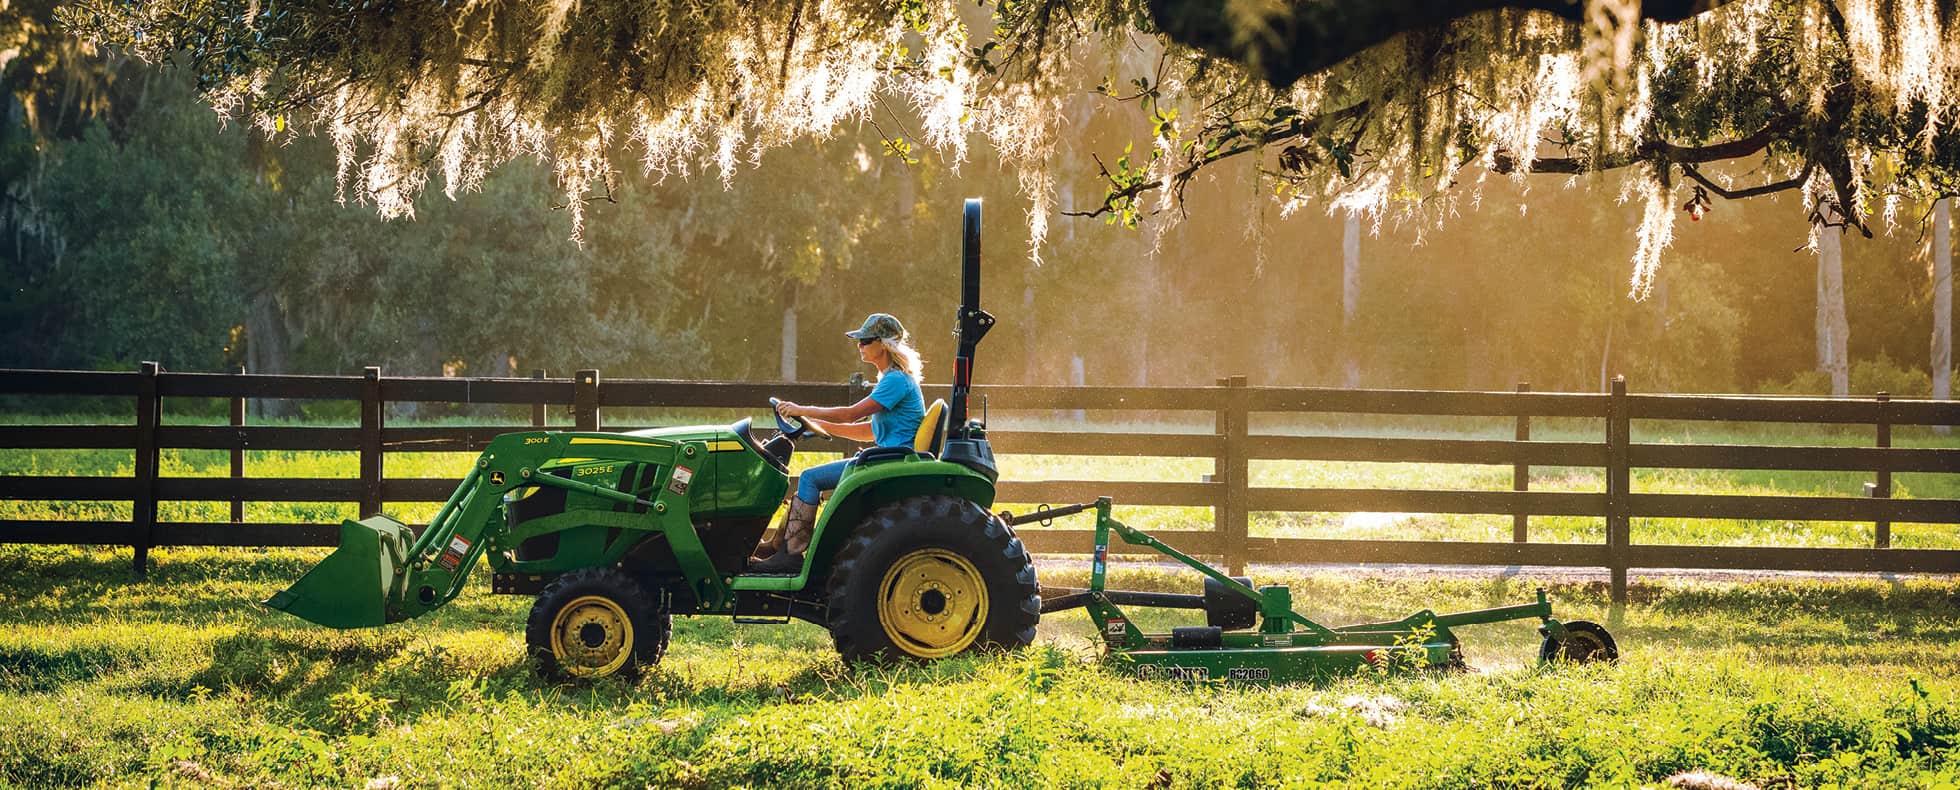 Important Tips for Buying a Used Compact Tractor